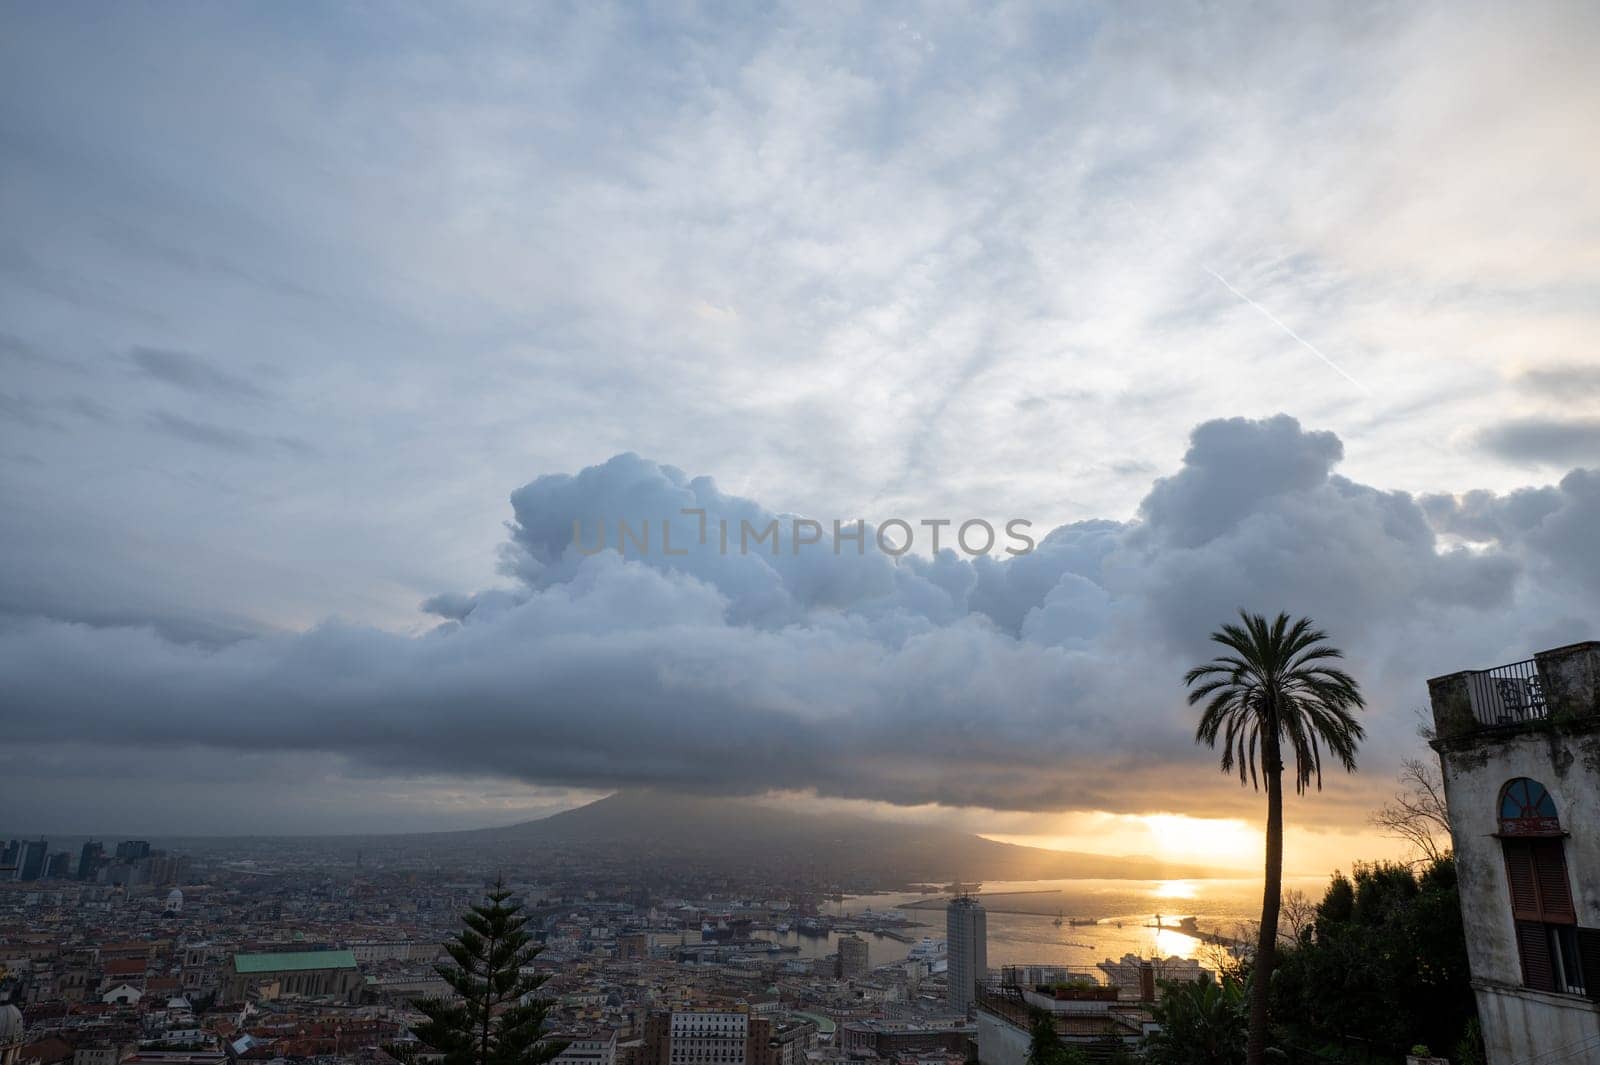 Cityscape of the city of Napoli in the morning with Vesuvius in the background.